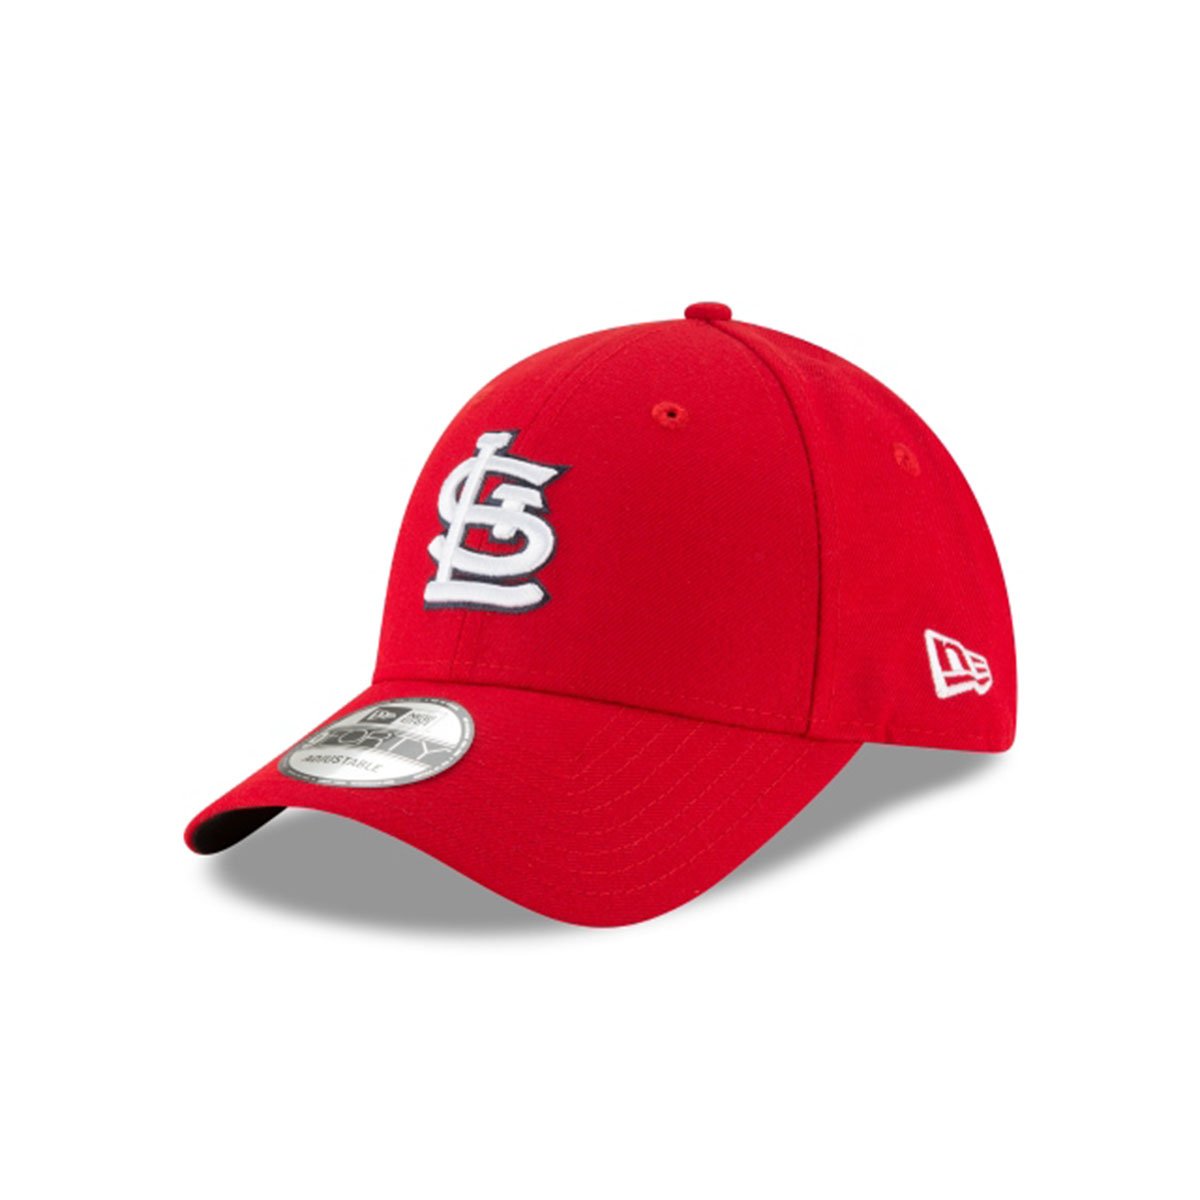 ST LOUIS CARDINALS_RED/WHITE